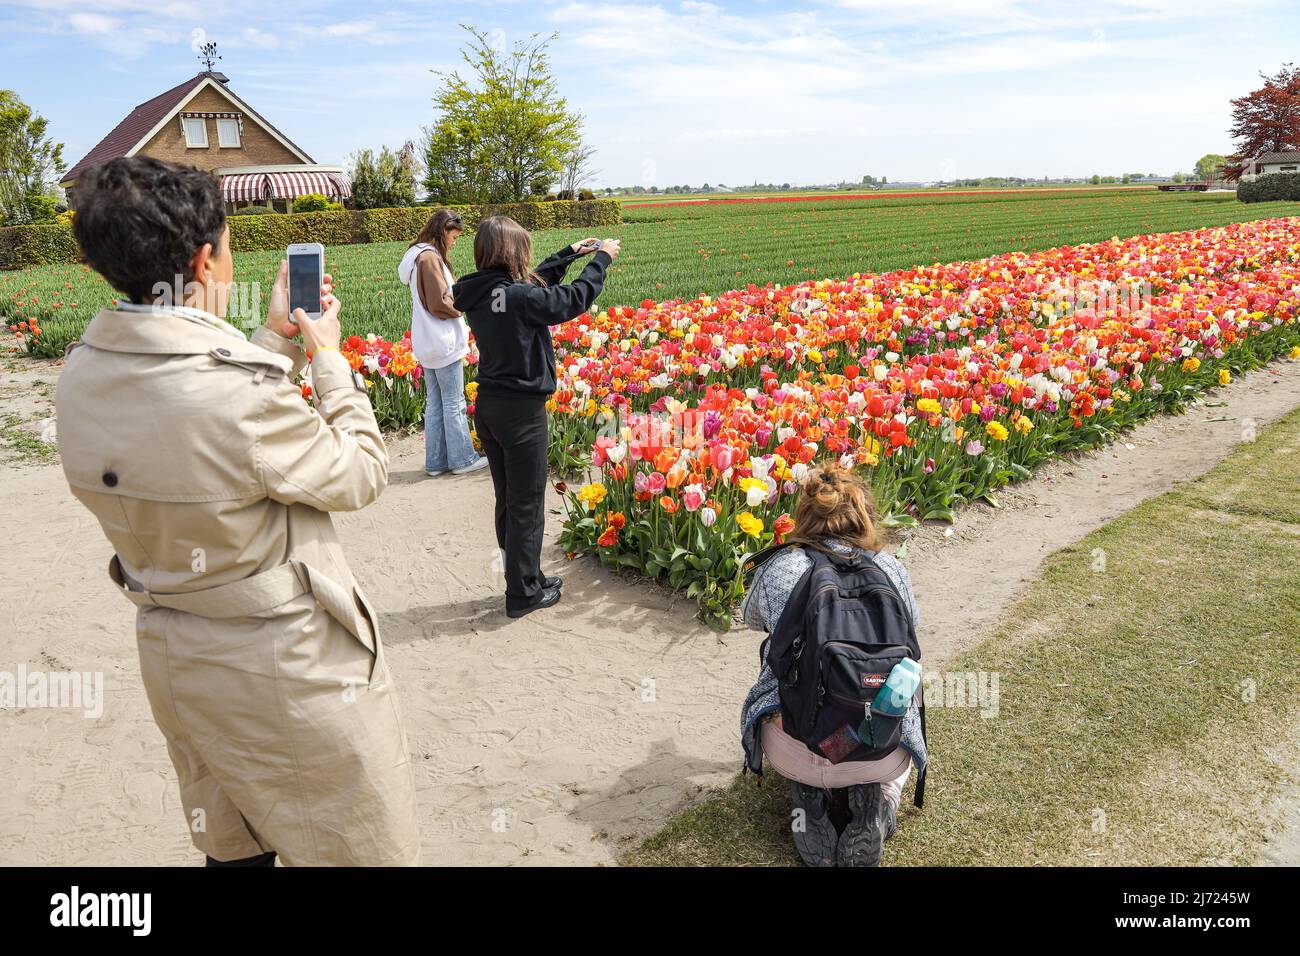 2022-05-04 12:26:18 De Zilk, May 4, 2022. Tourists take pictures of a colorful tulip field in the bulb region. ANP / Dutch Height / Sandra Uittenbogaart netherlands out - belgium out Stock Photo